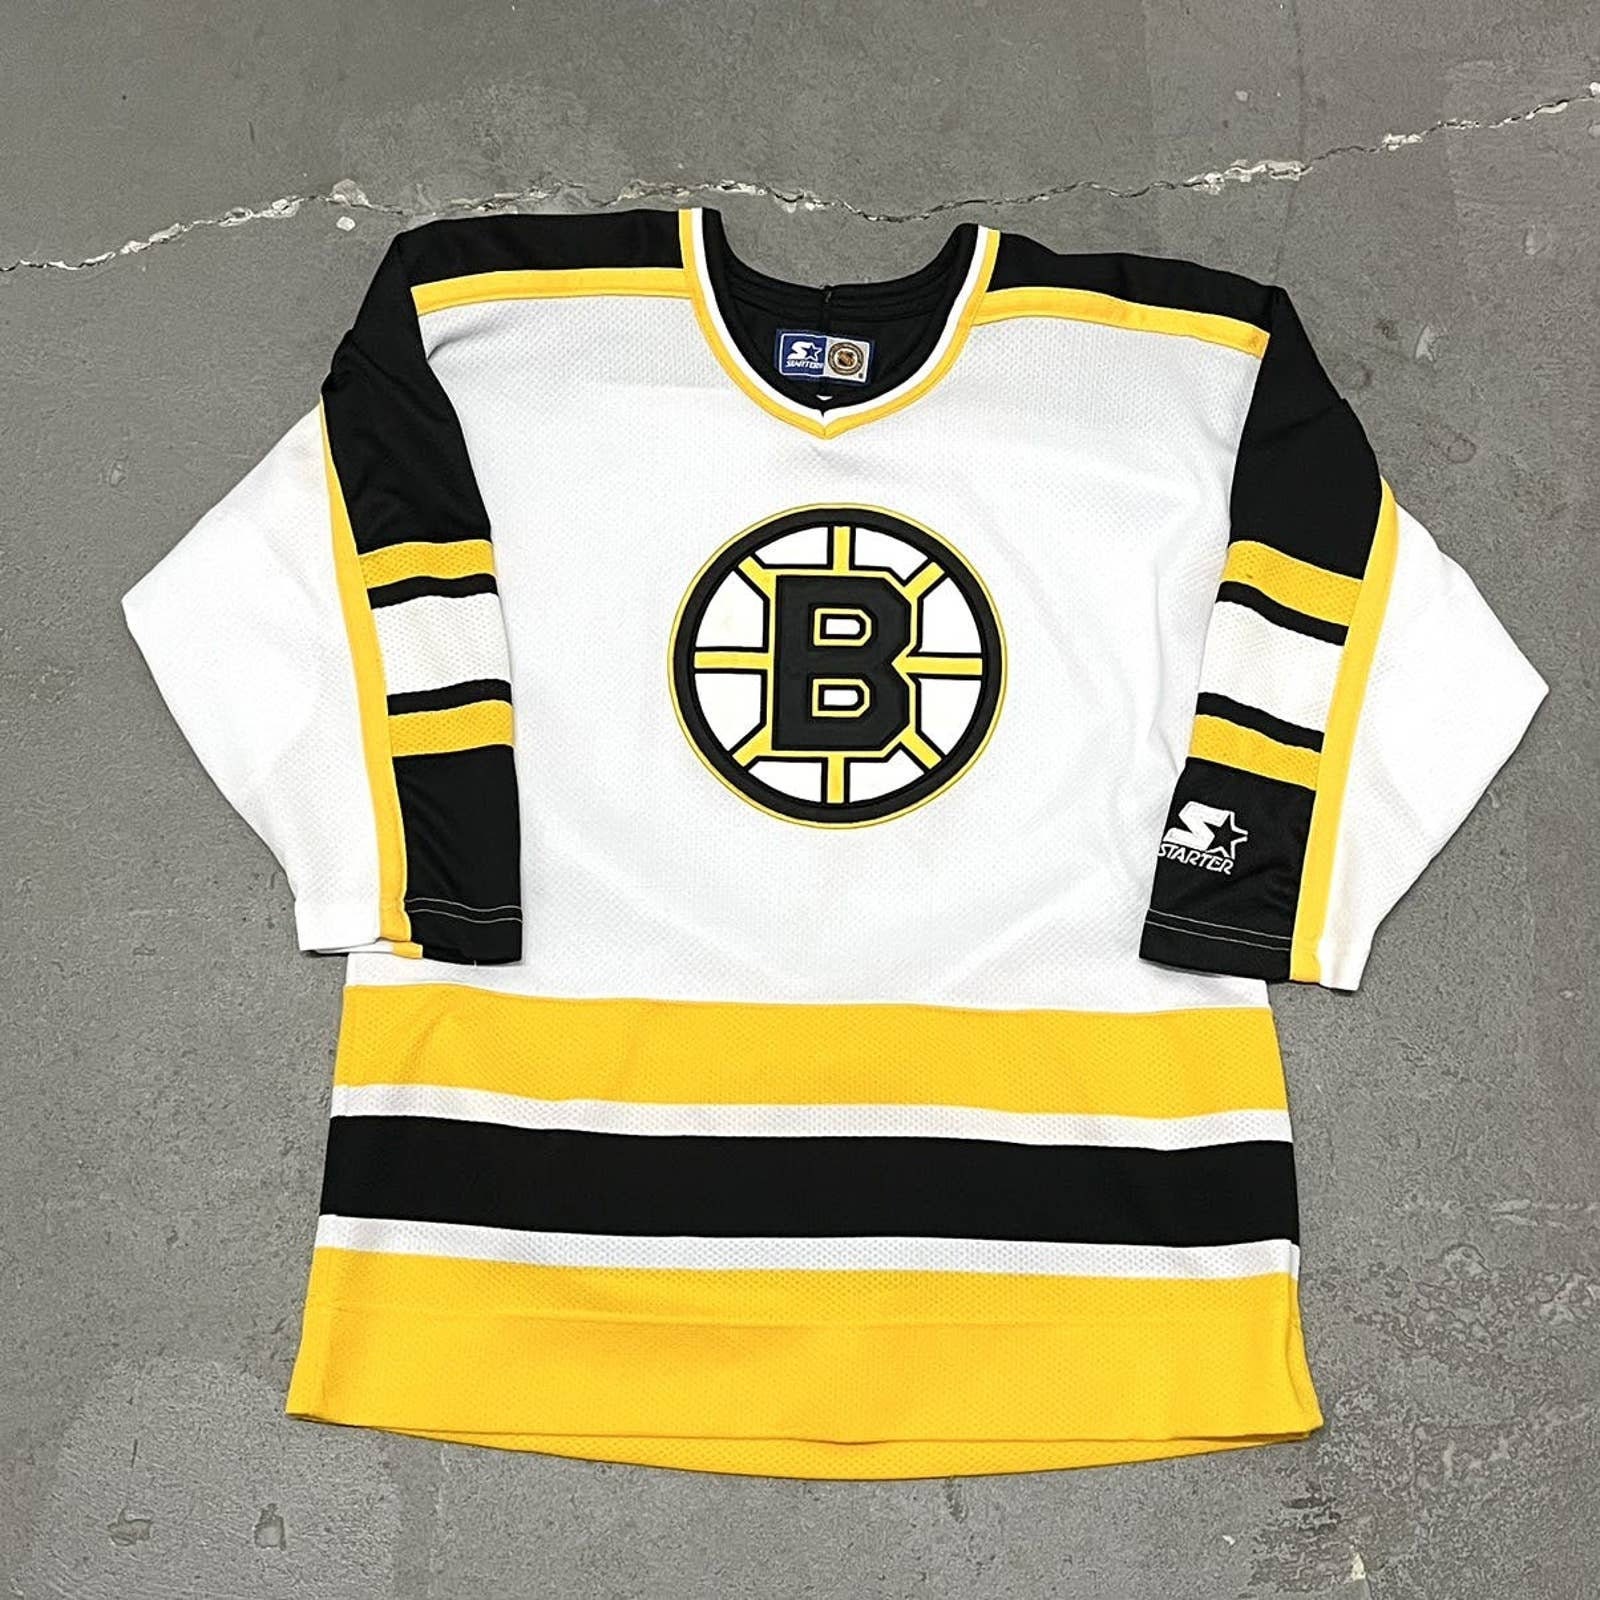 Bobby Orr Signed Boston Bruins Adidas Pro Home Jersey